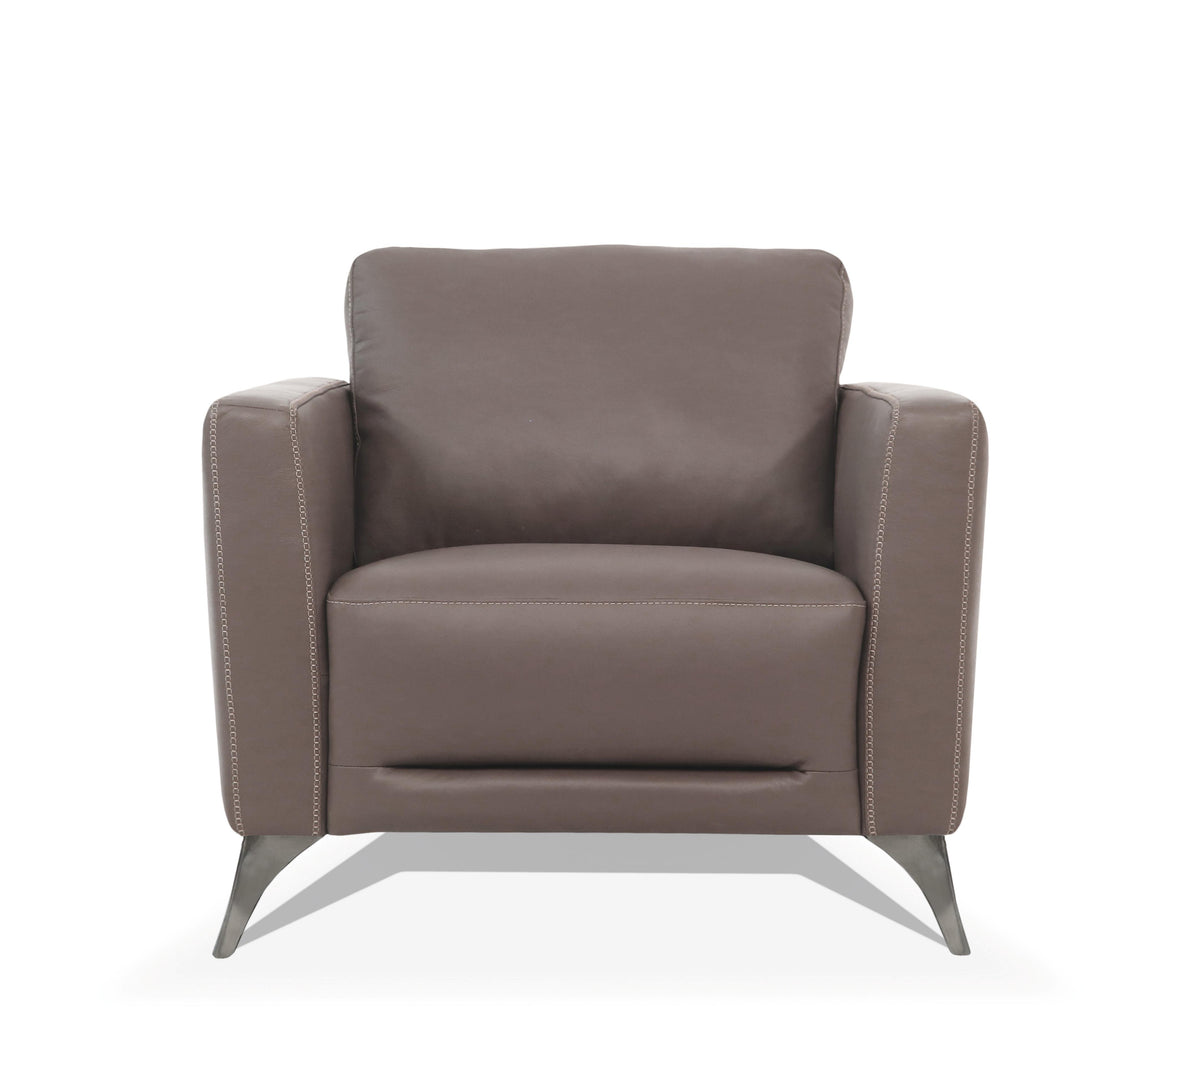 Malaga Taupe Leather Chair  Las Vegas Furniture Stores